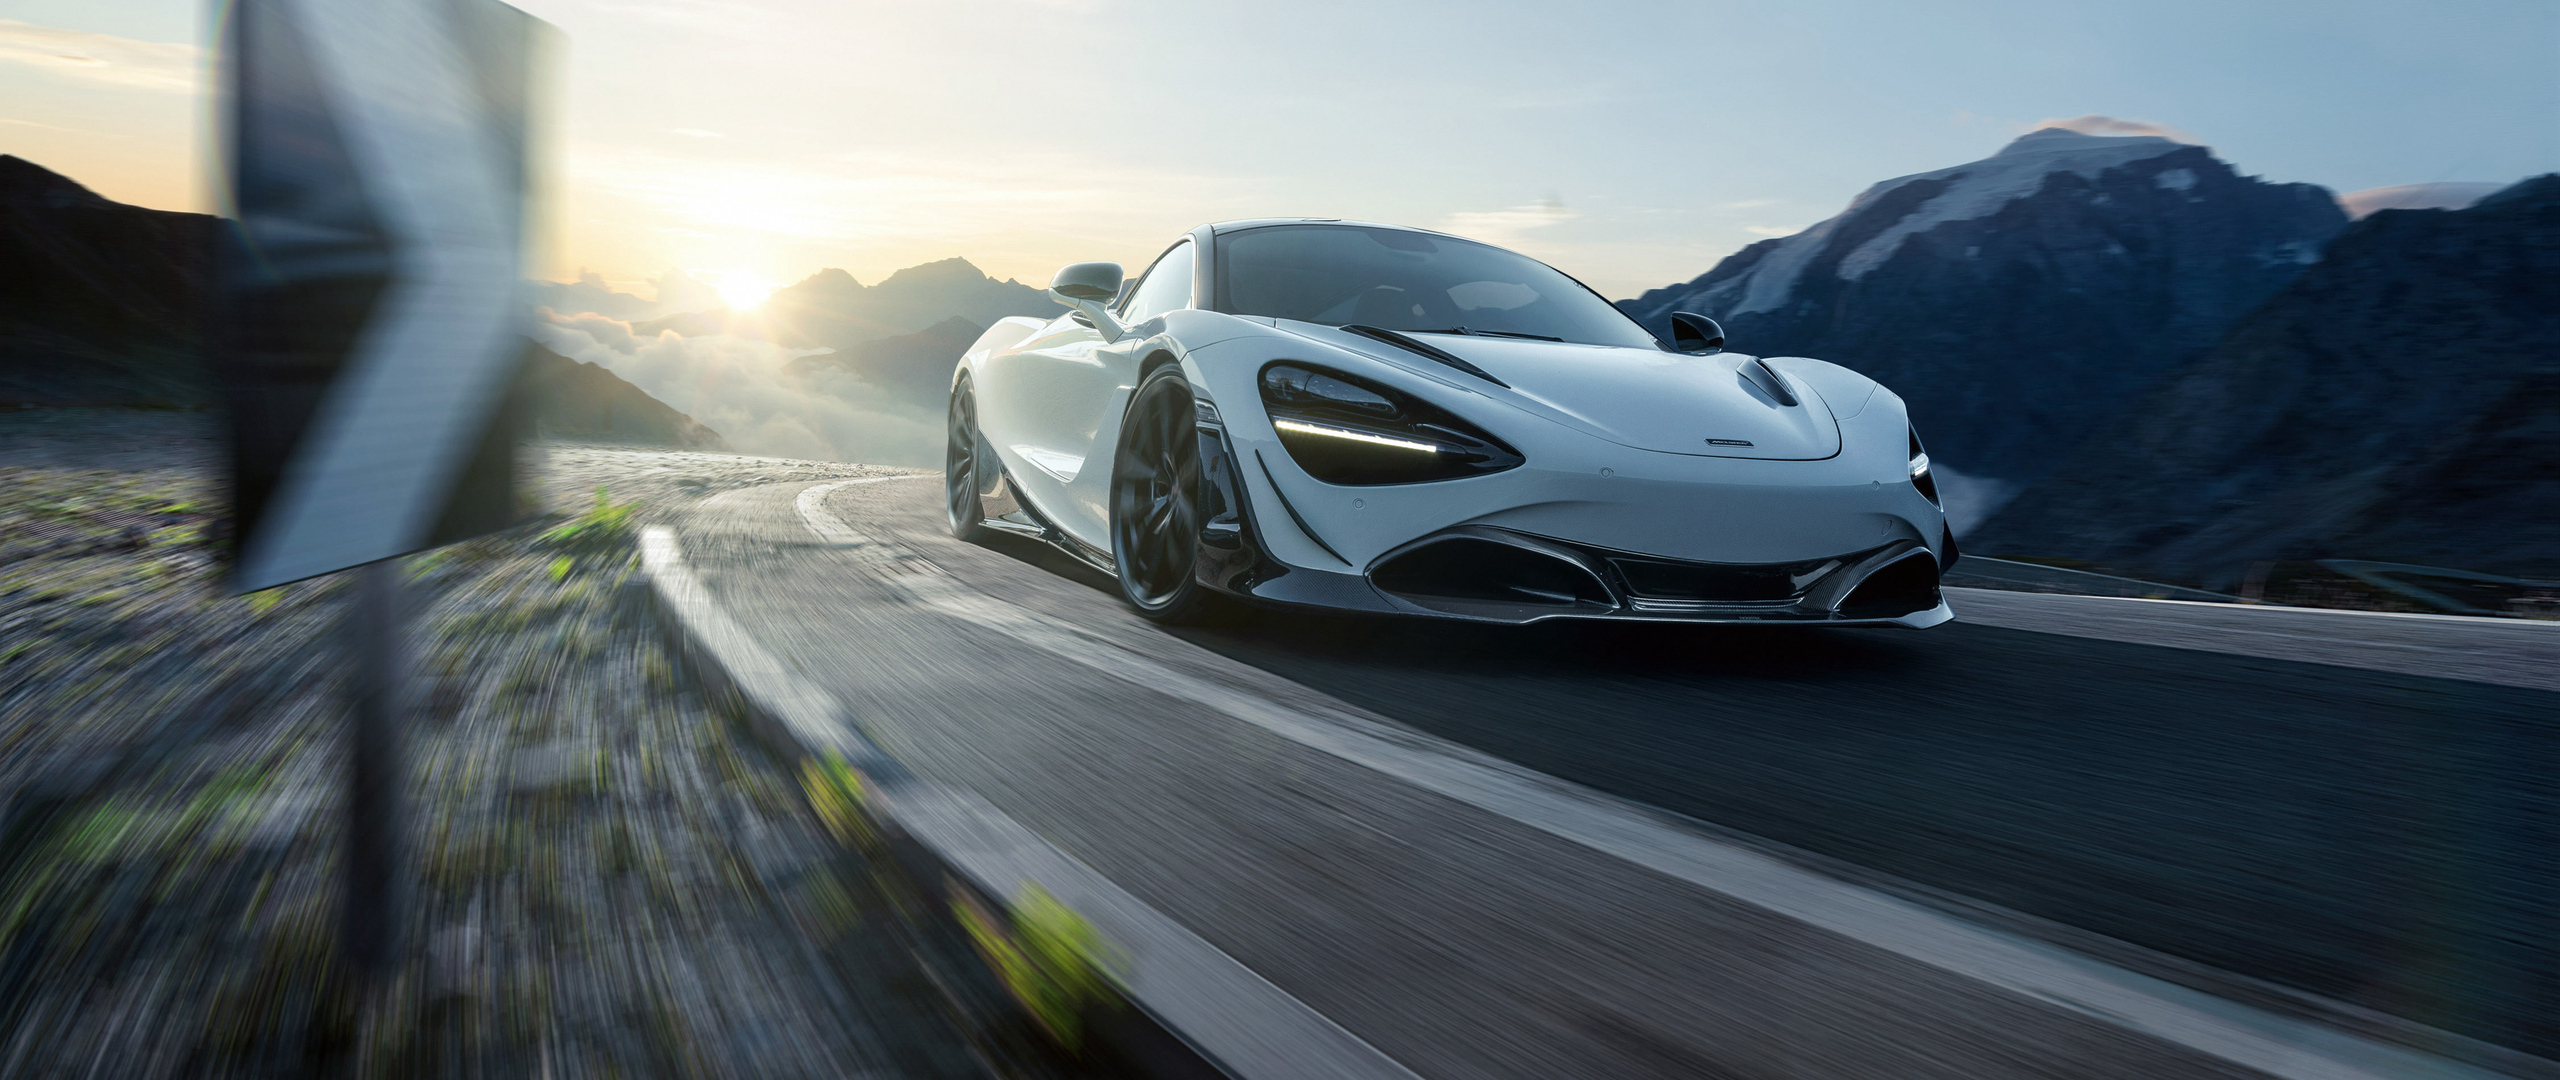 2560x1080 4k Novitec Mclaren 720s 2560x1080 Resolution Hd 4k Wallpapers Images Backgrounds Photos And Pictures